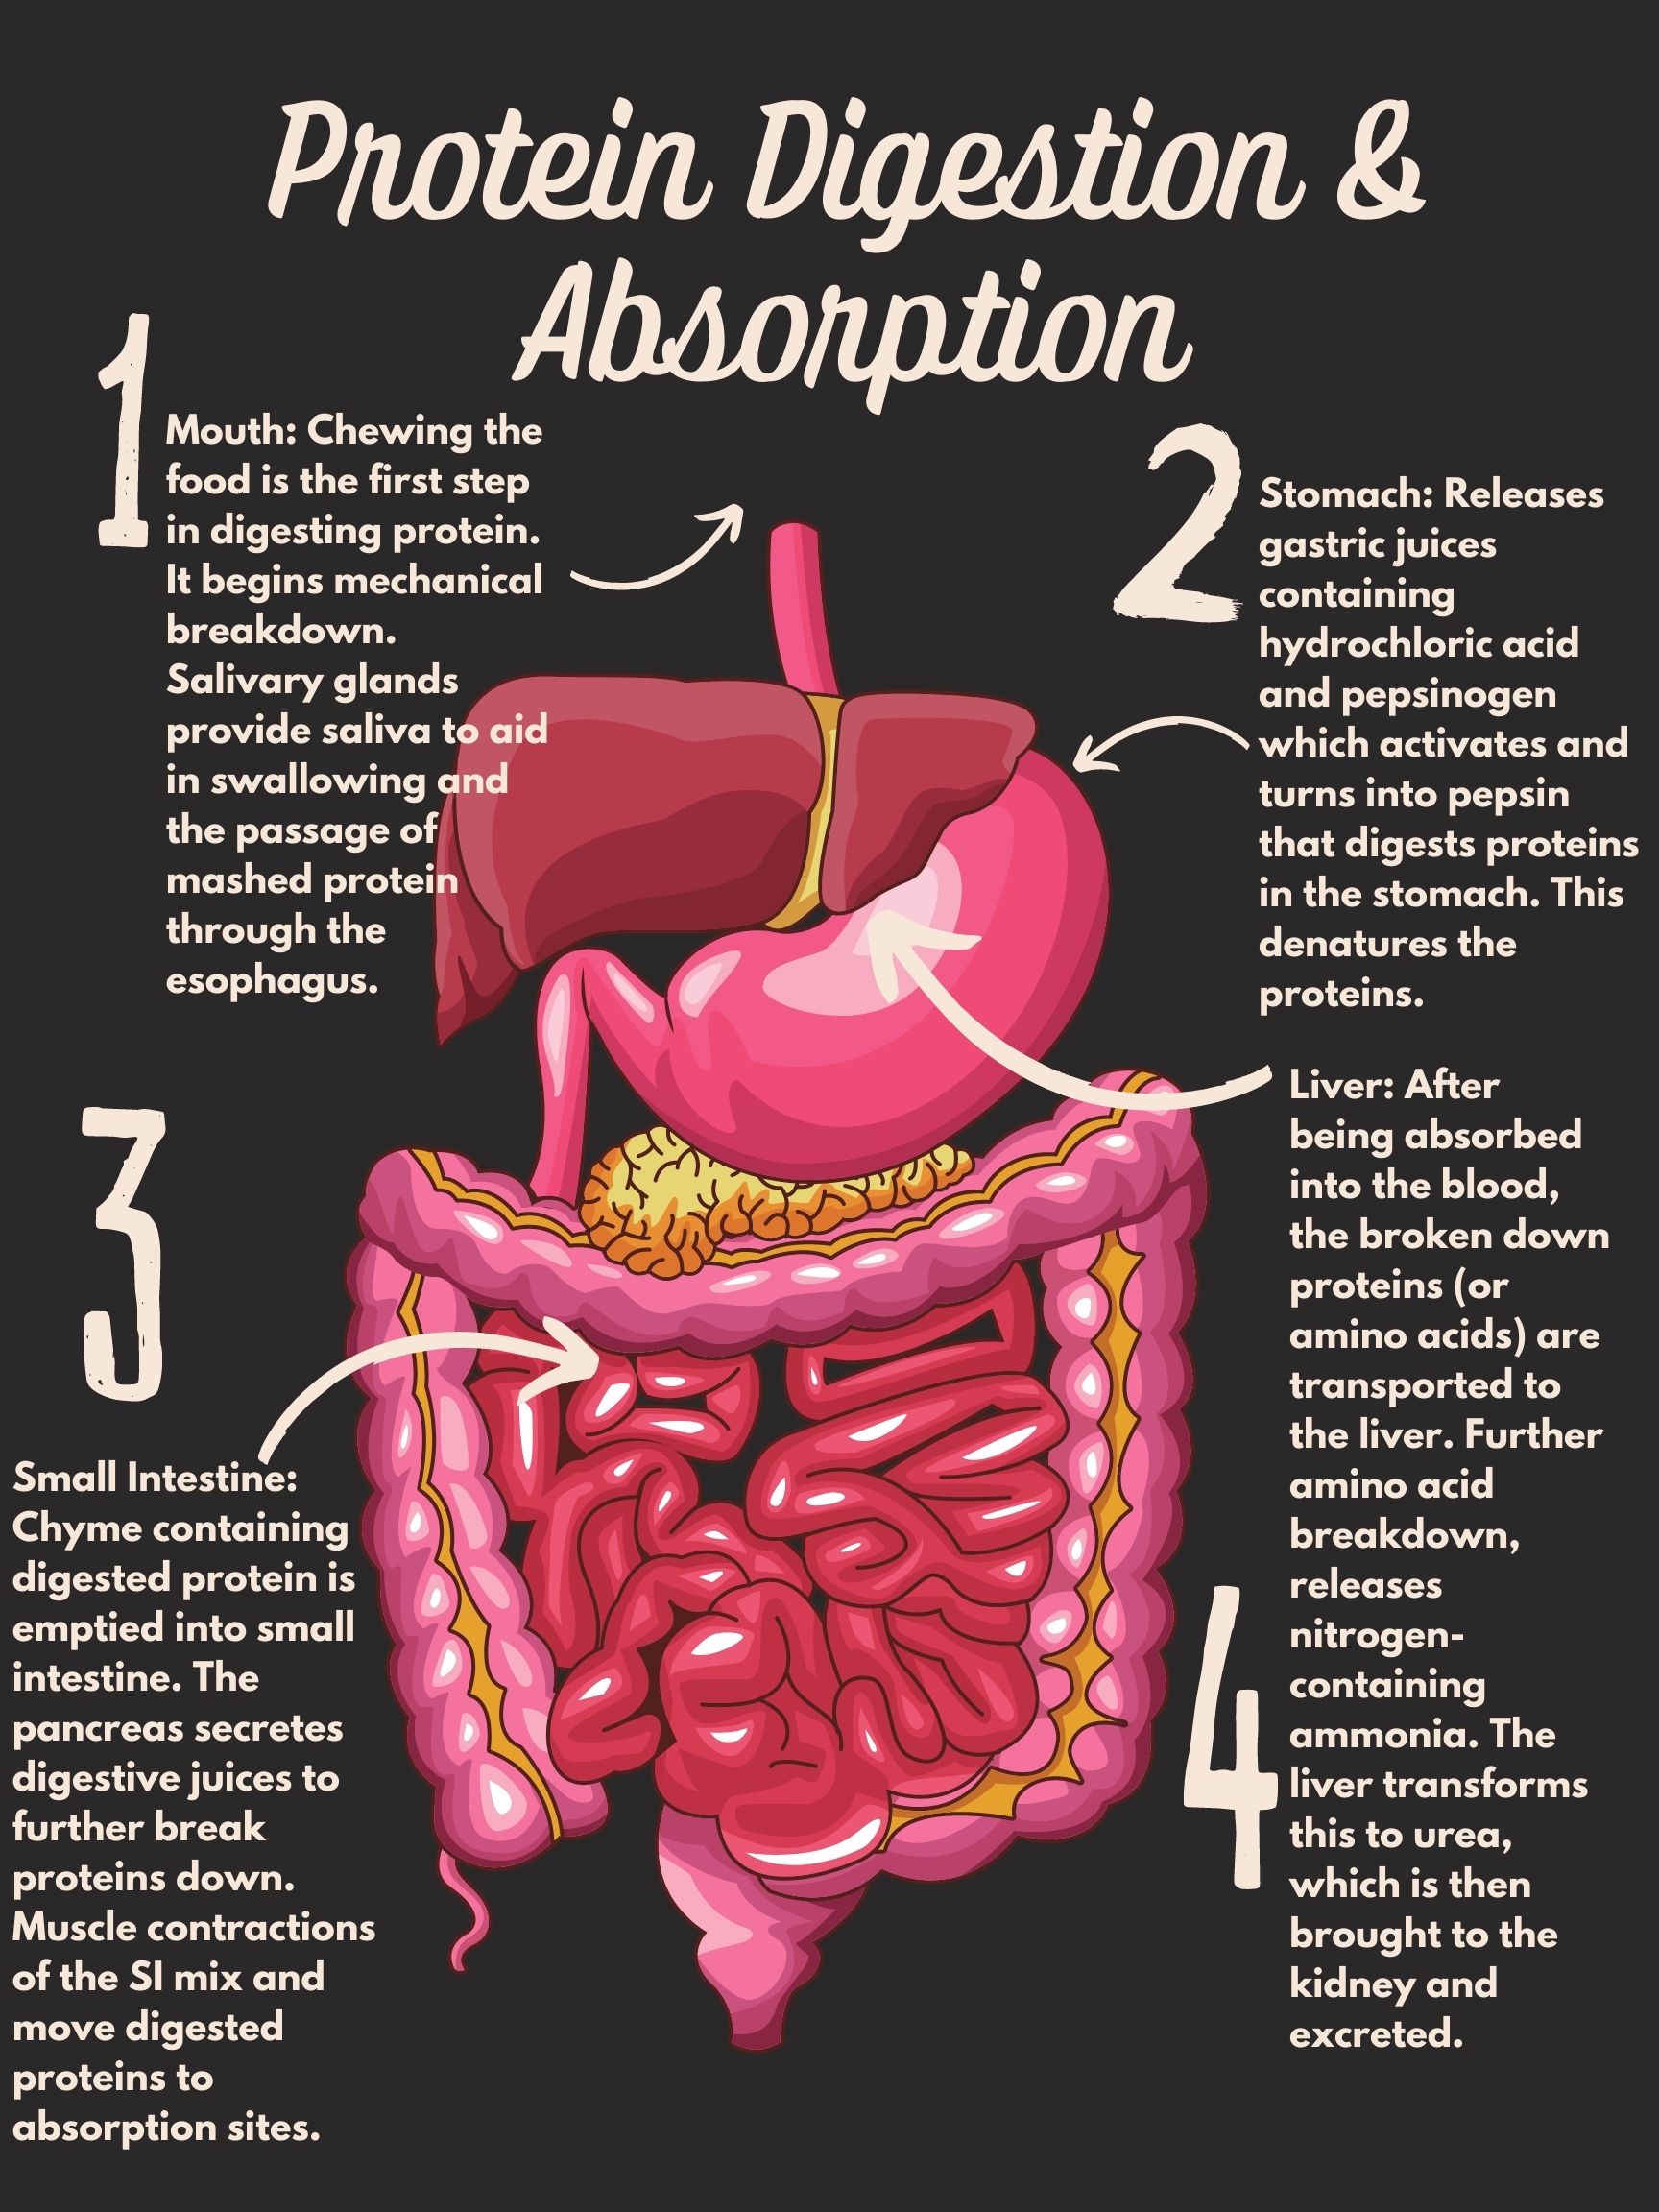 Image showing the organs of digestion and how they are involved in protein digestion.